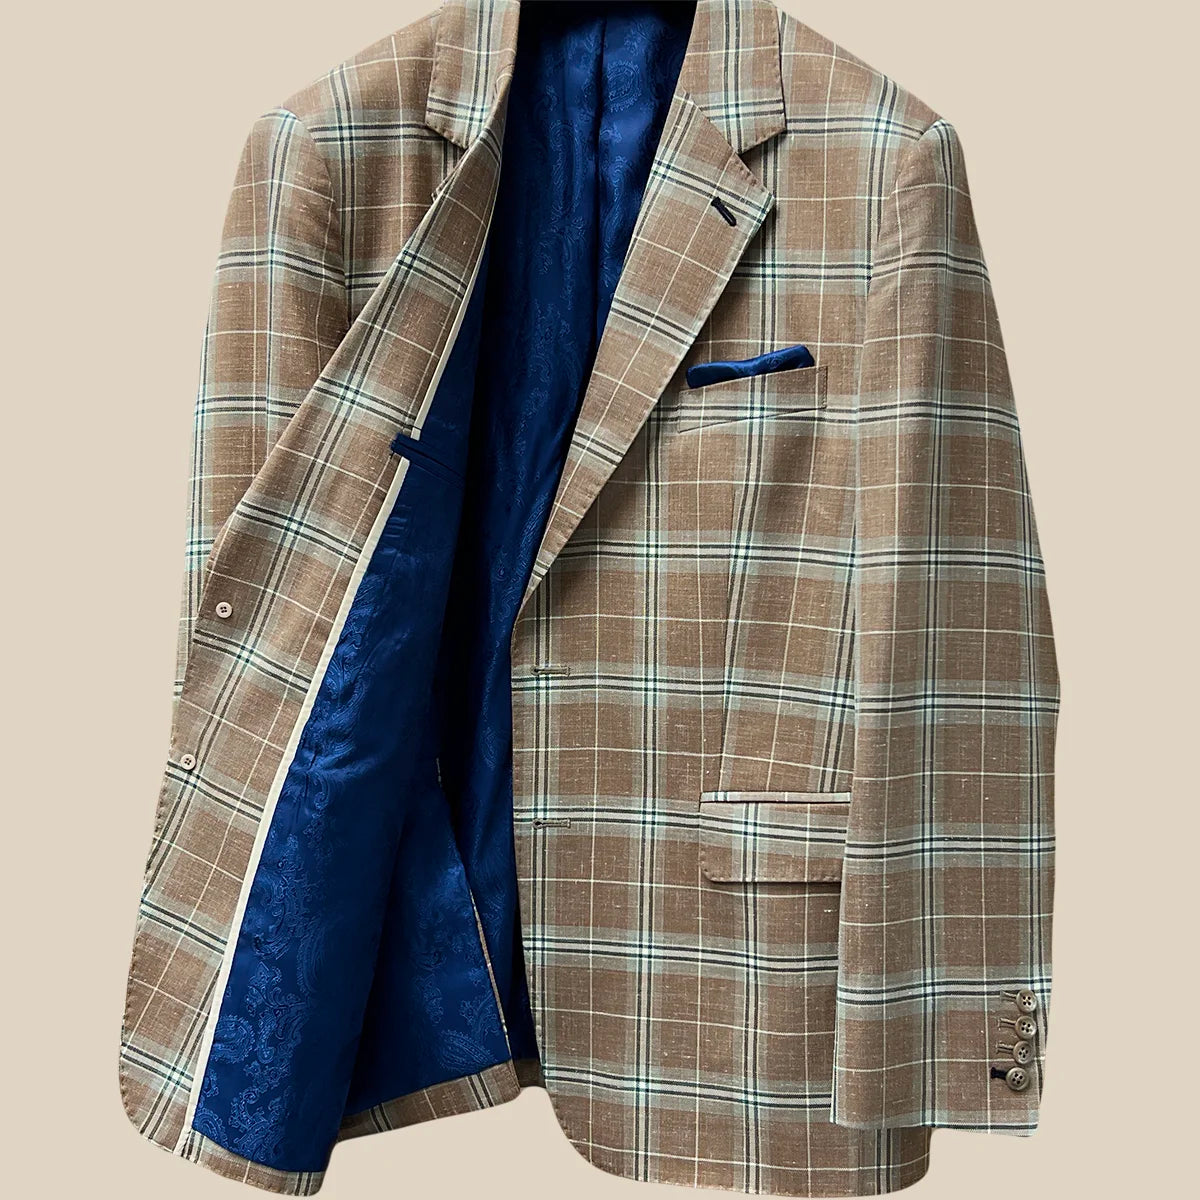 Inside right view showcasing lining quality of a brown beige men's sport coat with blanched almond and midnight blue windowpane pattern.